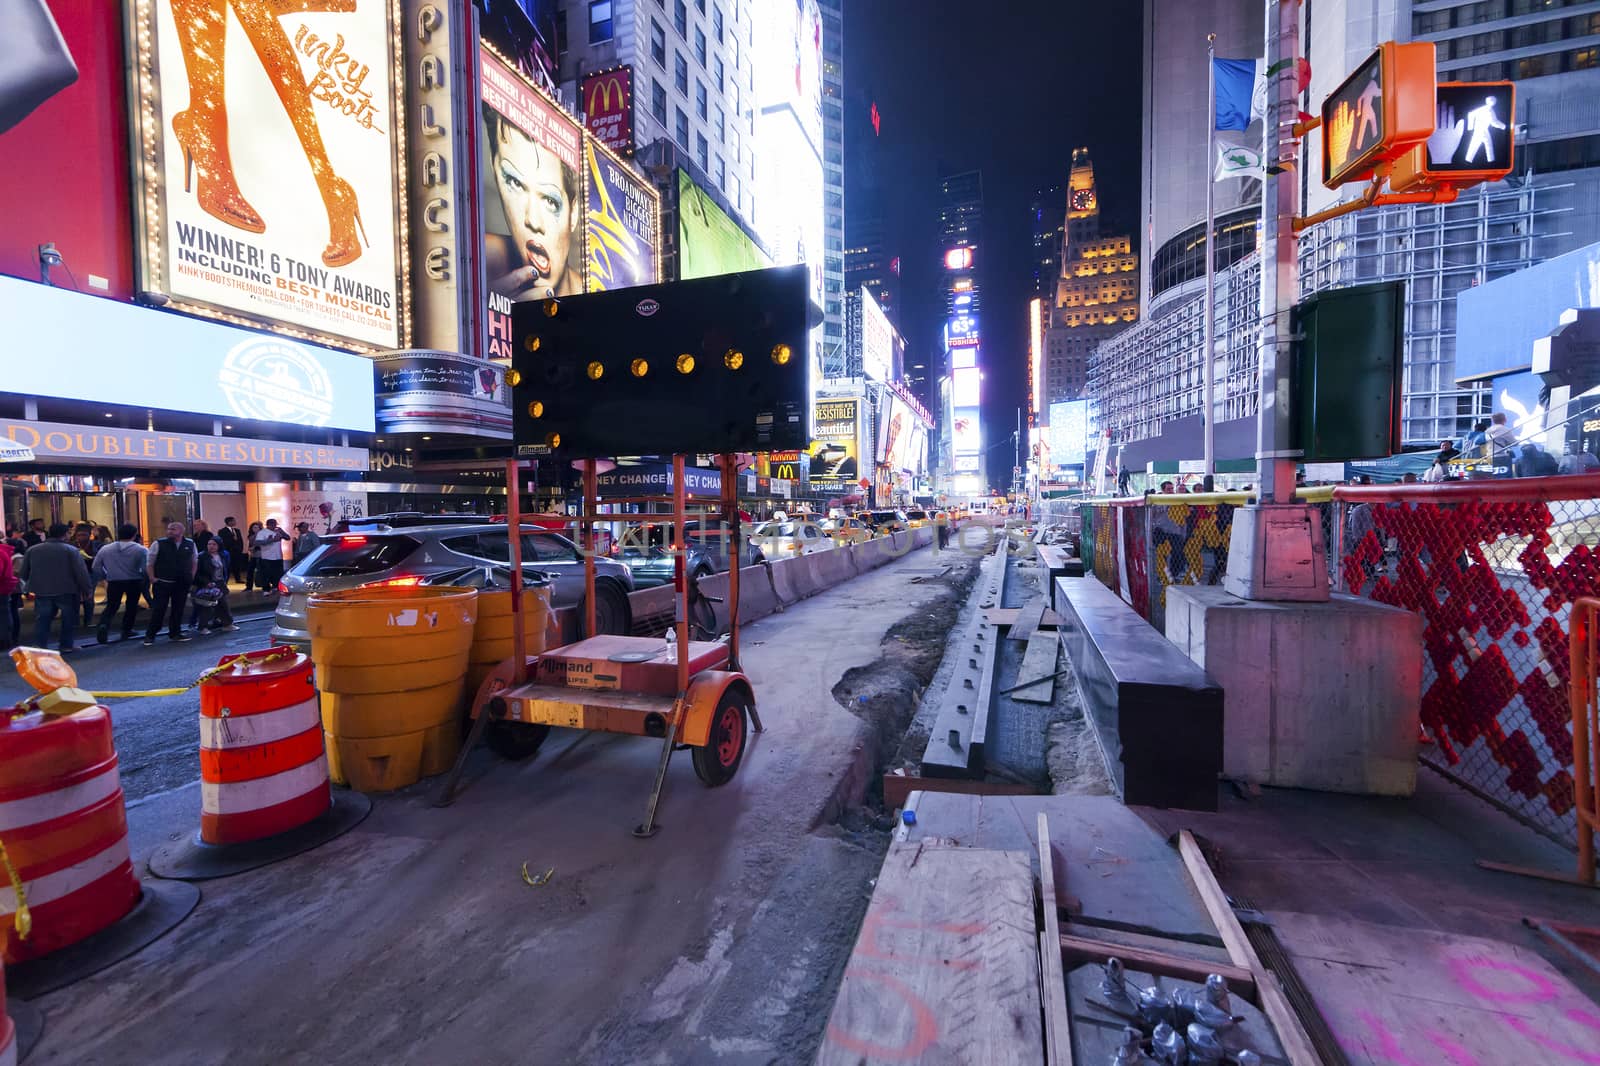 NEW YORK CITY, USA - OCT 4 : Times Square reconstruction of the road and Sidewalks. Taken on Manhattan October 4. 2014, New York City.